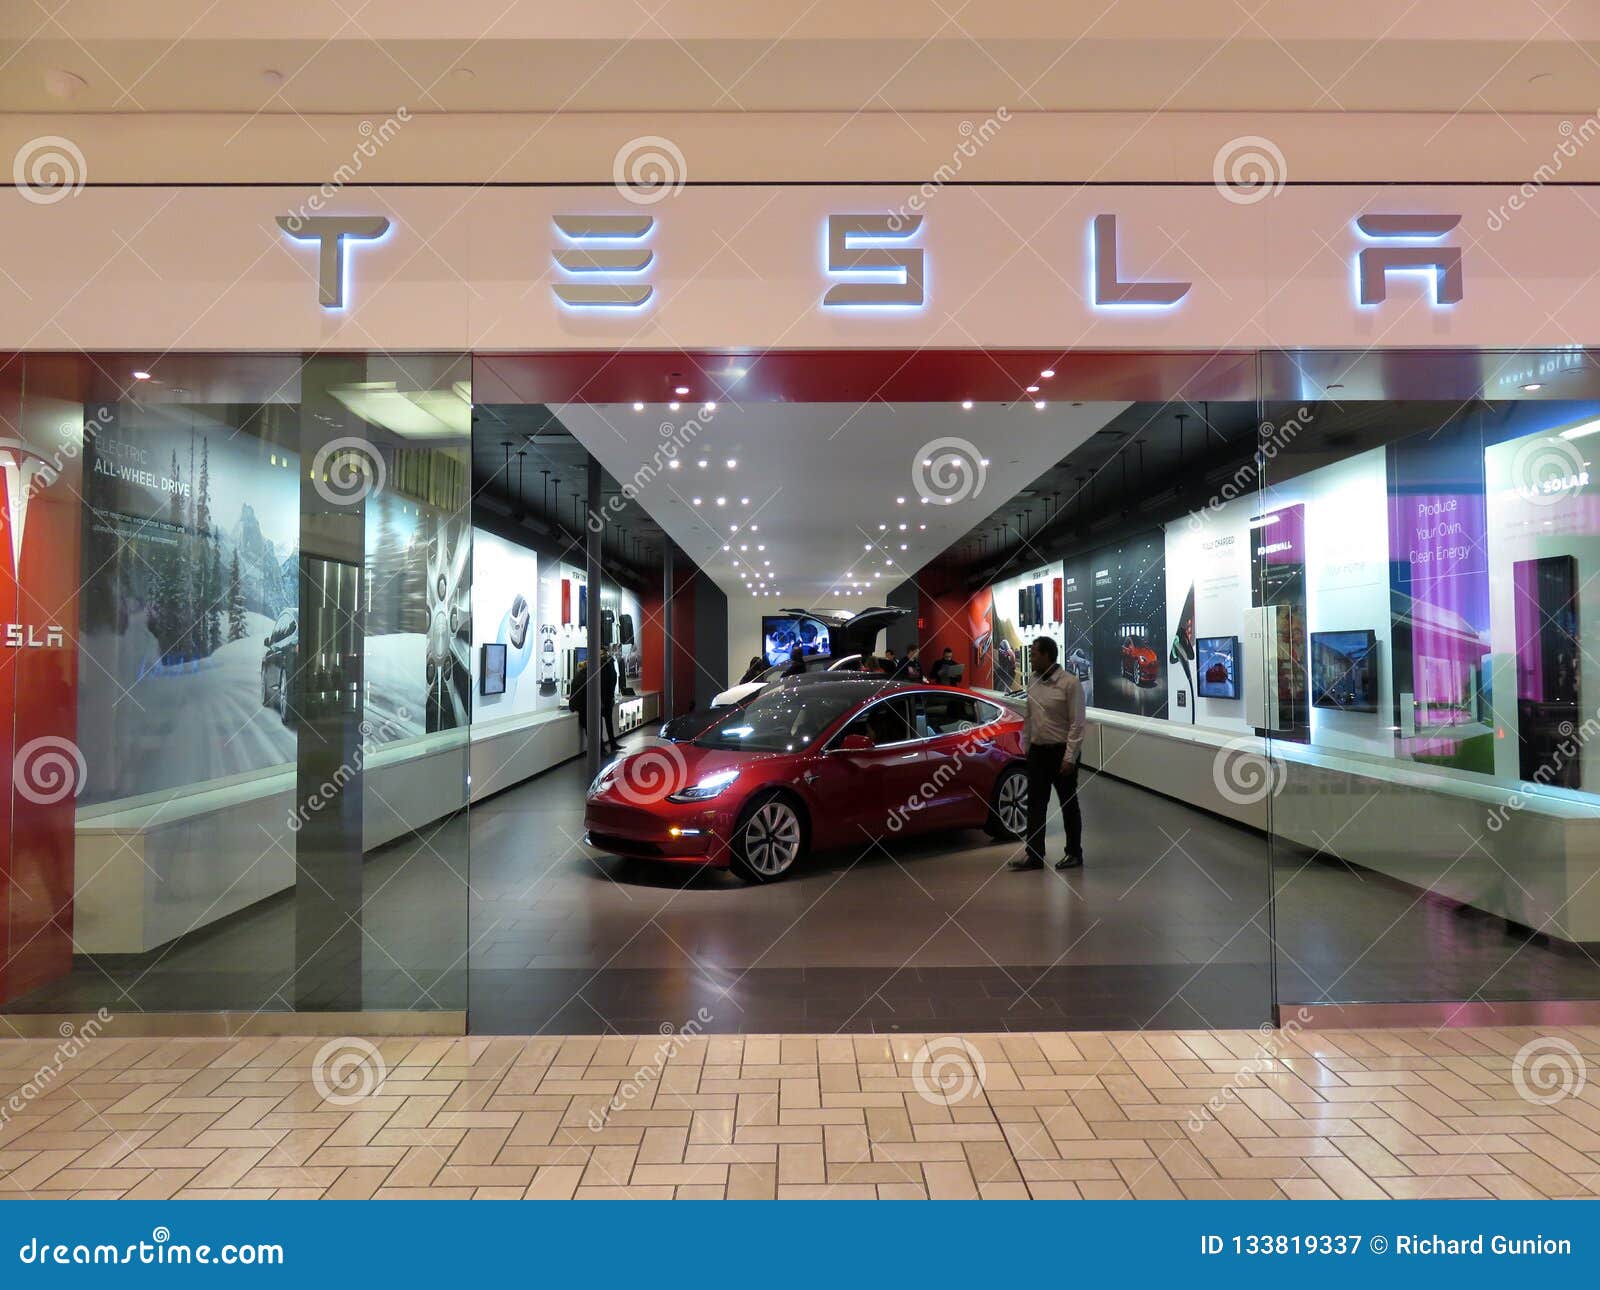 tesla-store-tesla-is-a-specialized-american-company-in-electric-cars